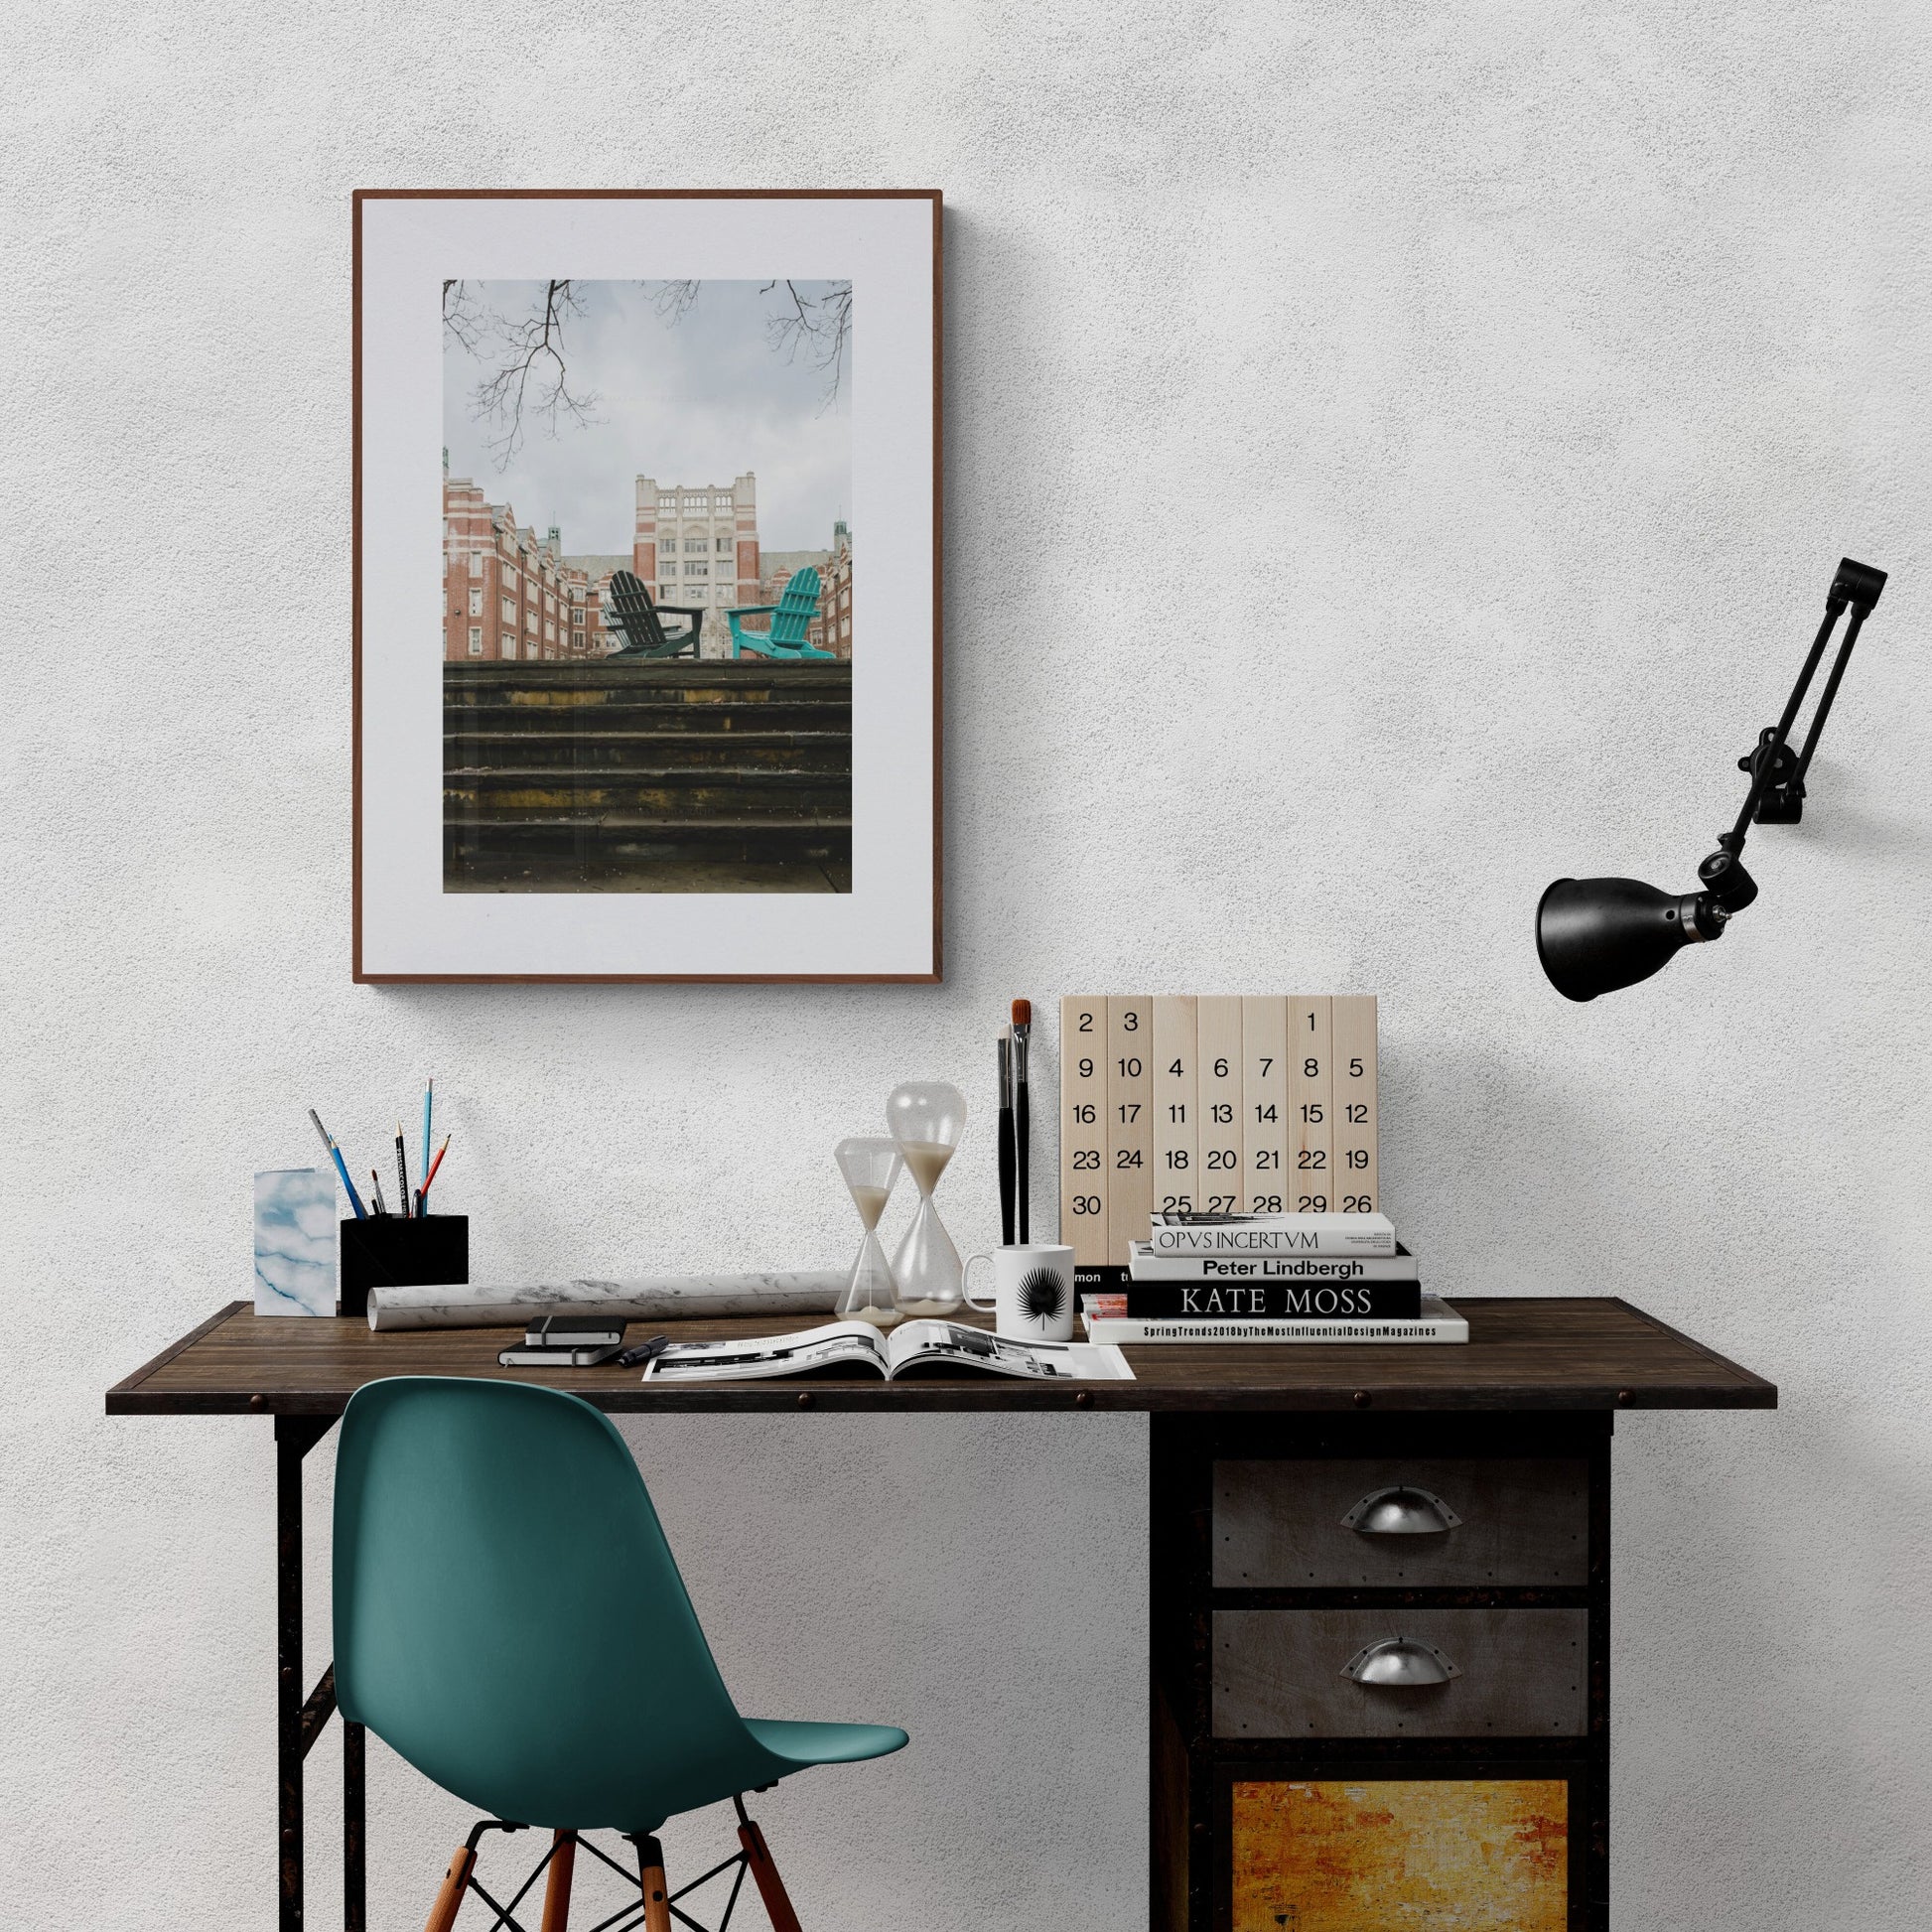 Wellesley College Photograph of Tower Courtyard with Adirondack chairs in a home office desk as wall art